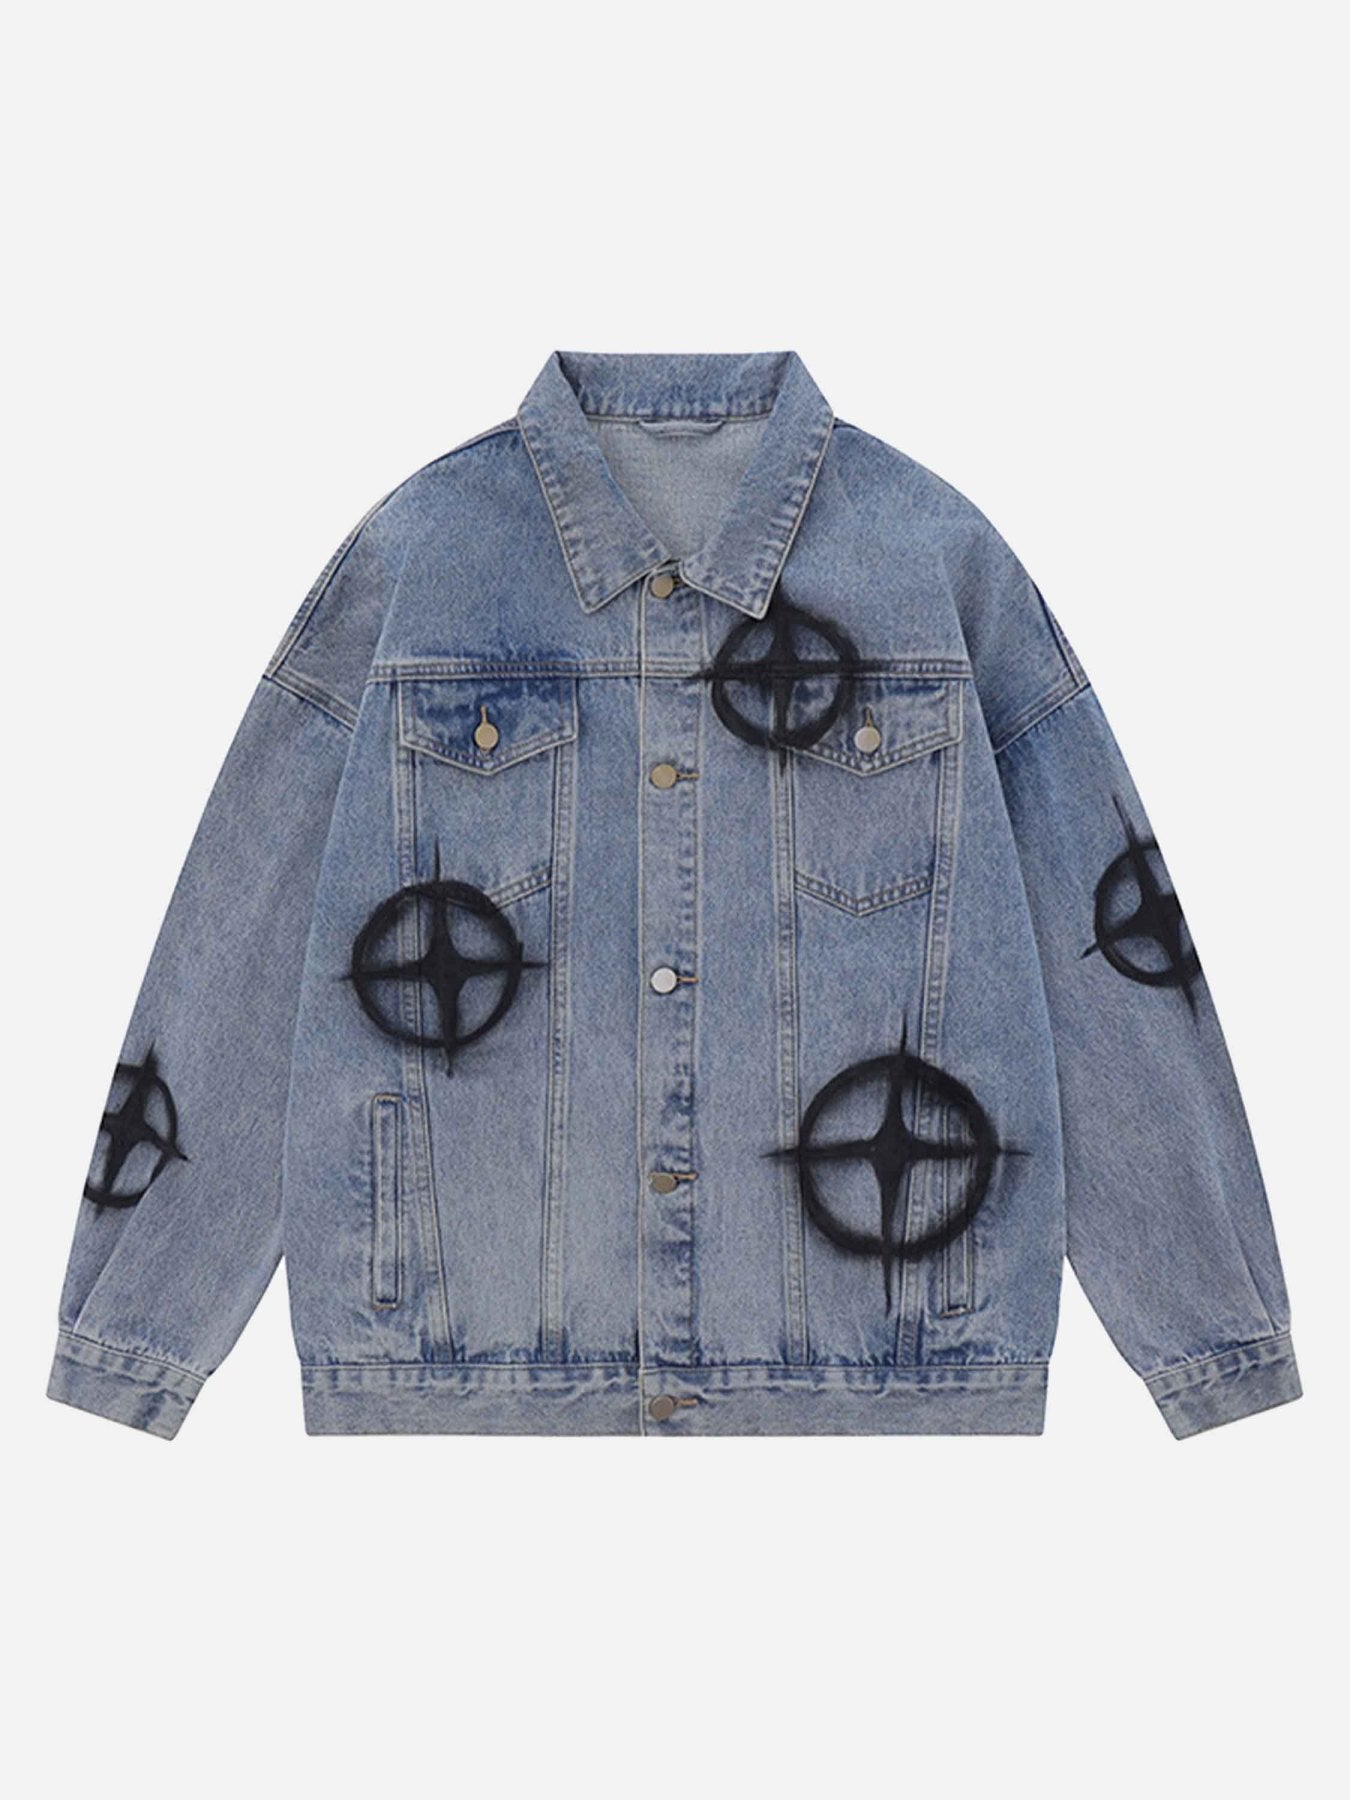 The Supermade Hand-painted Denim Jacket